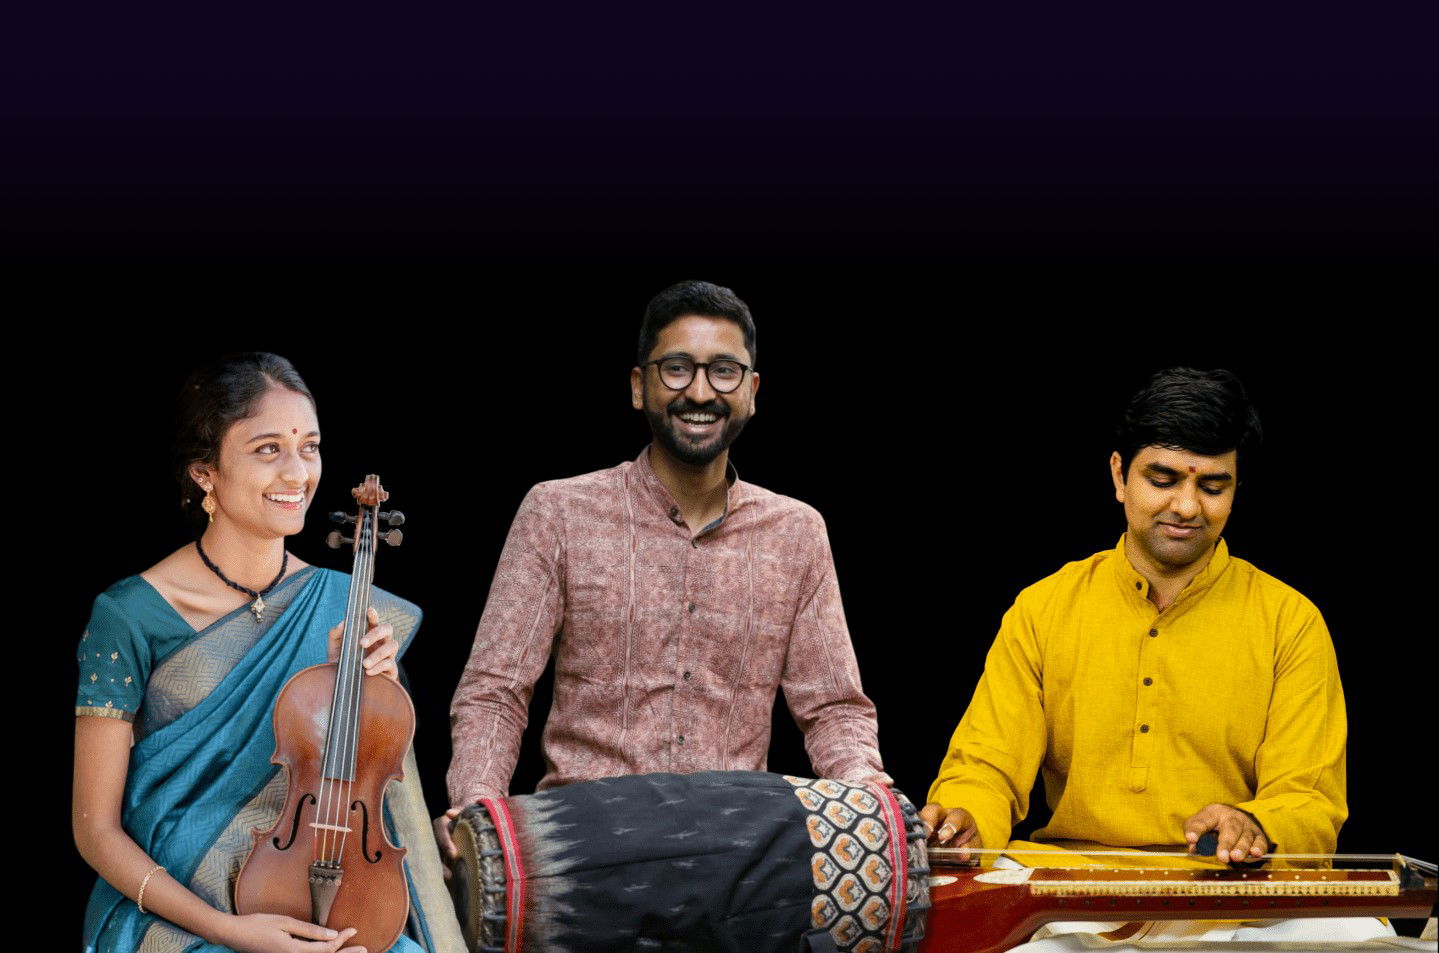 METRMAG Spotlight On: South Indian Trio "Unfretted" coming to Club Passim (Cambridge, MA.)